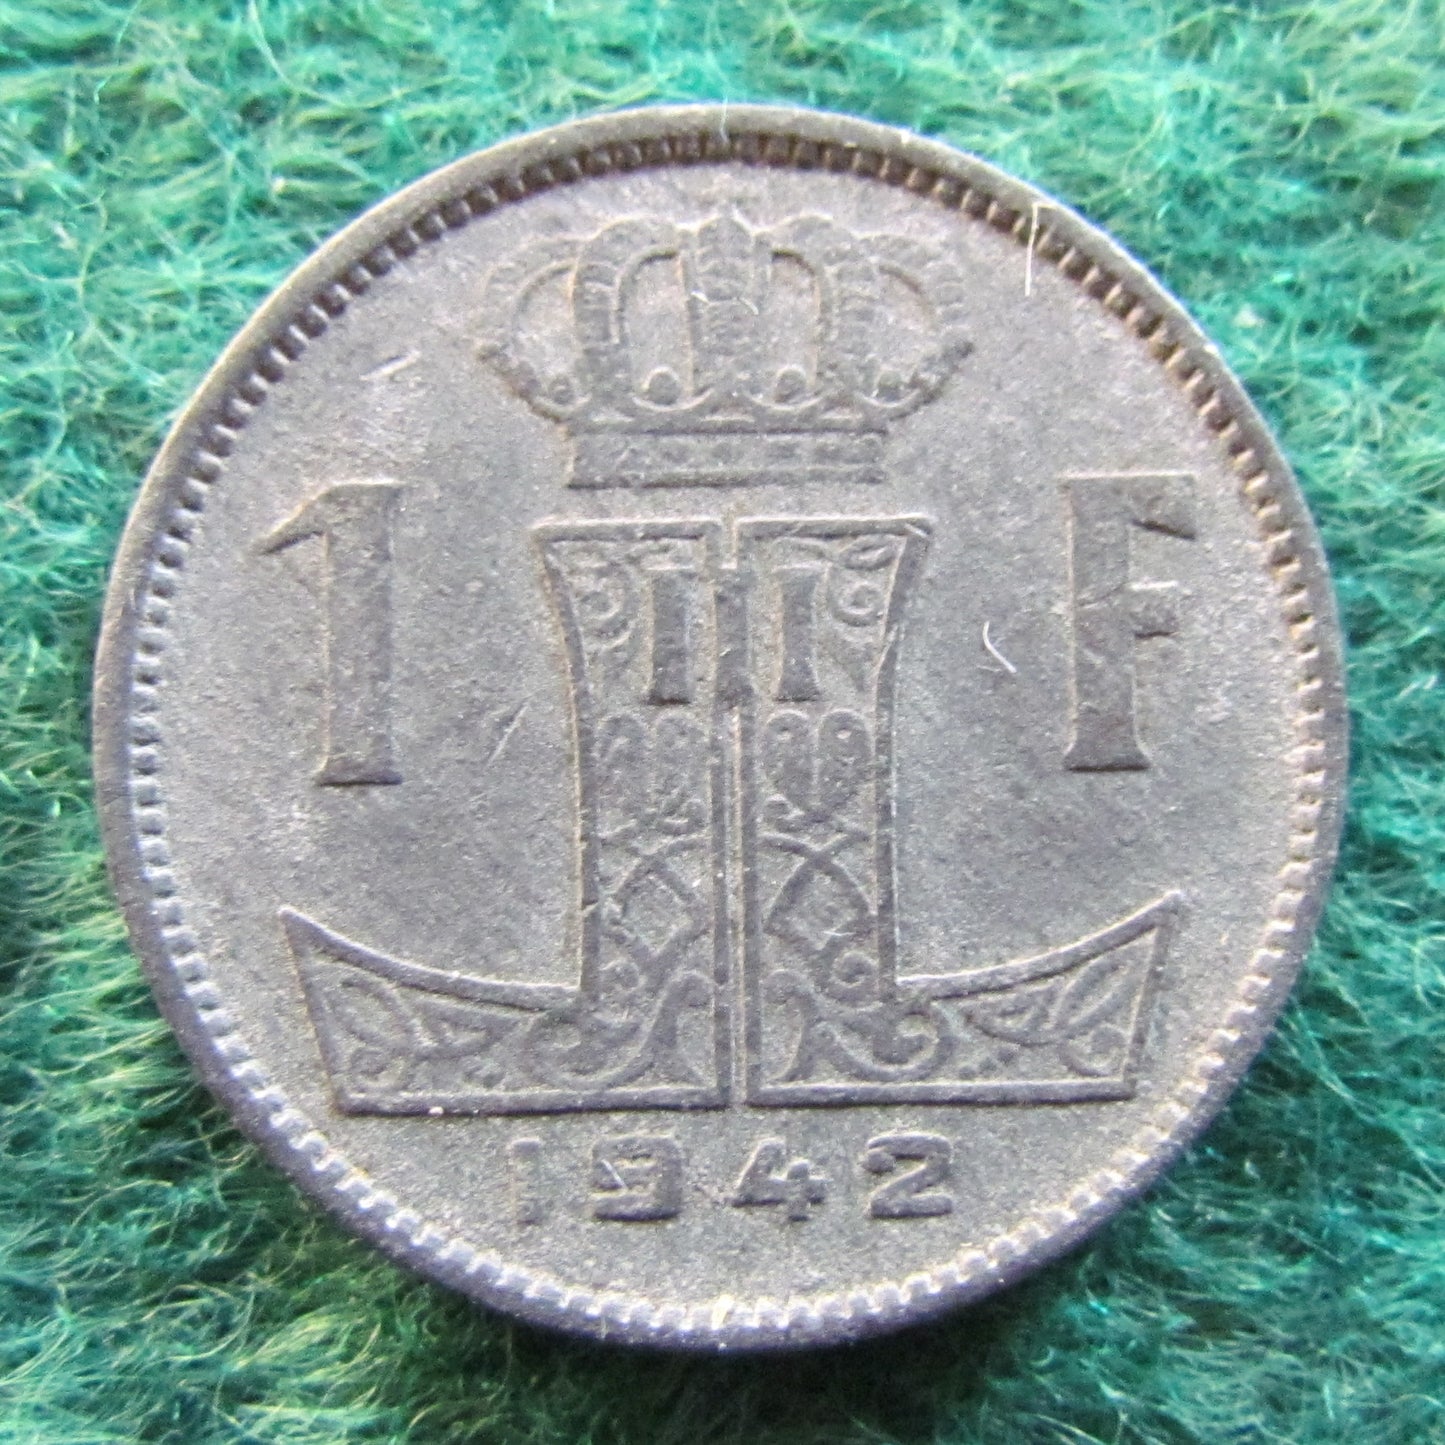 Belgium 1942 1 Franc Coin - WWII Currency - Circulated